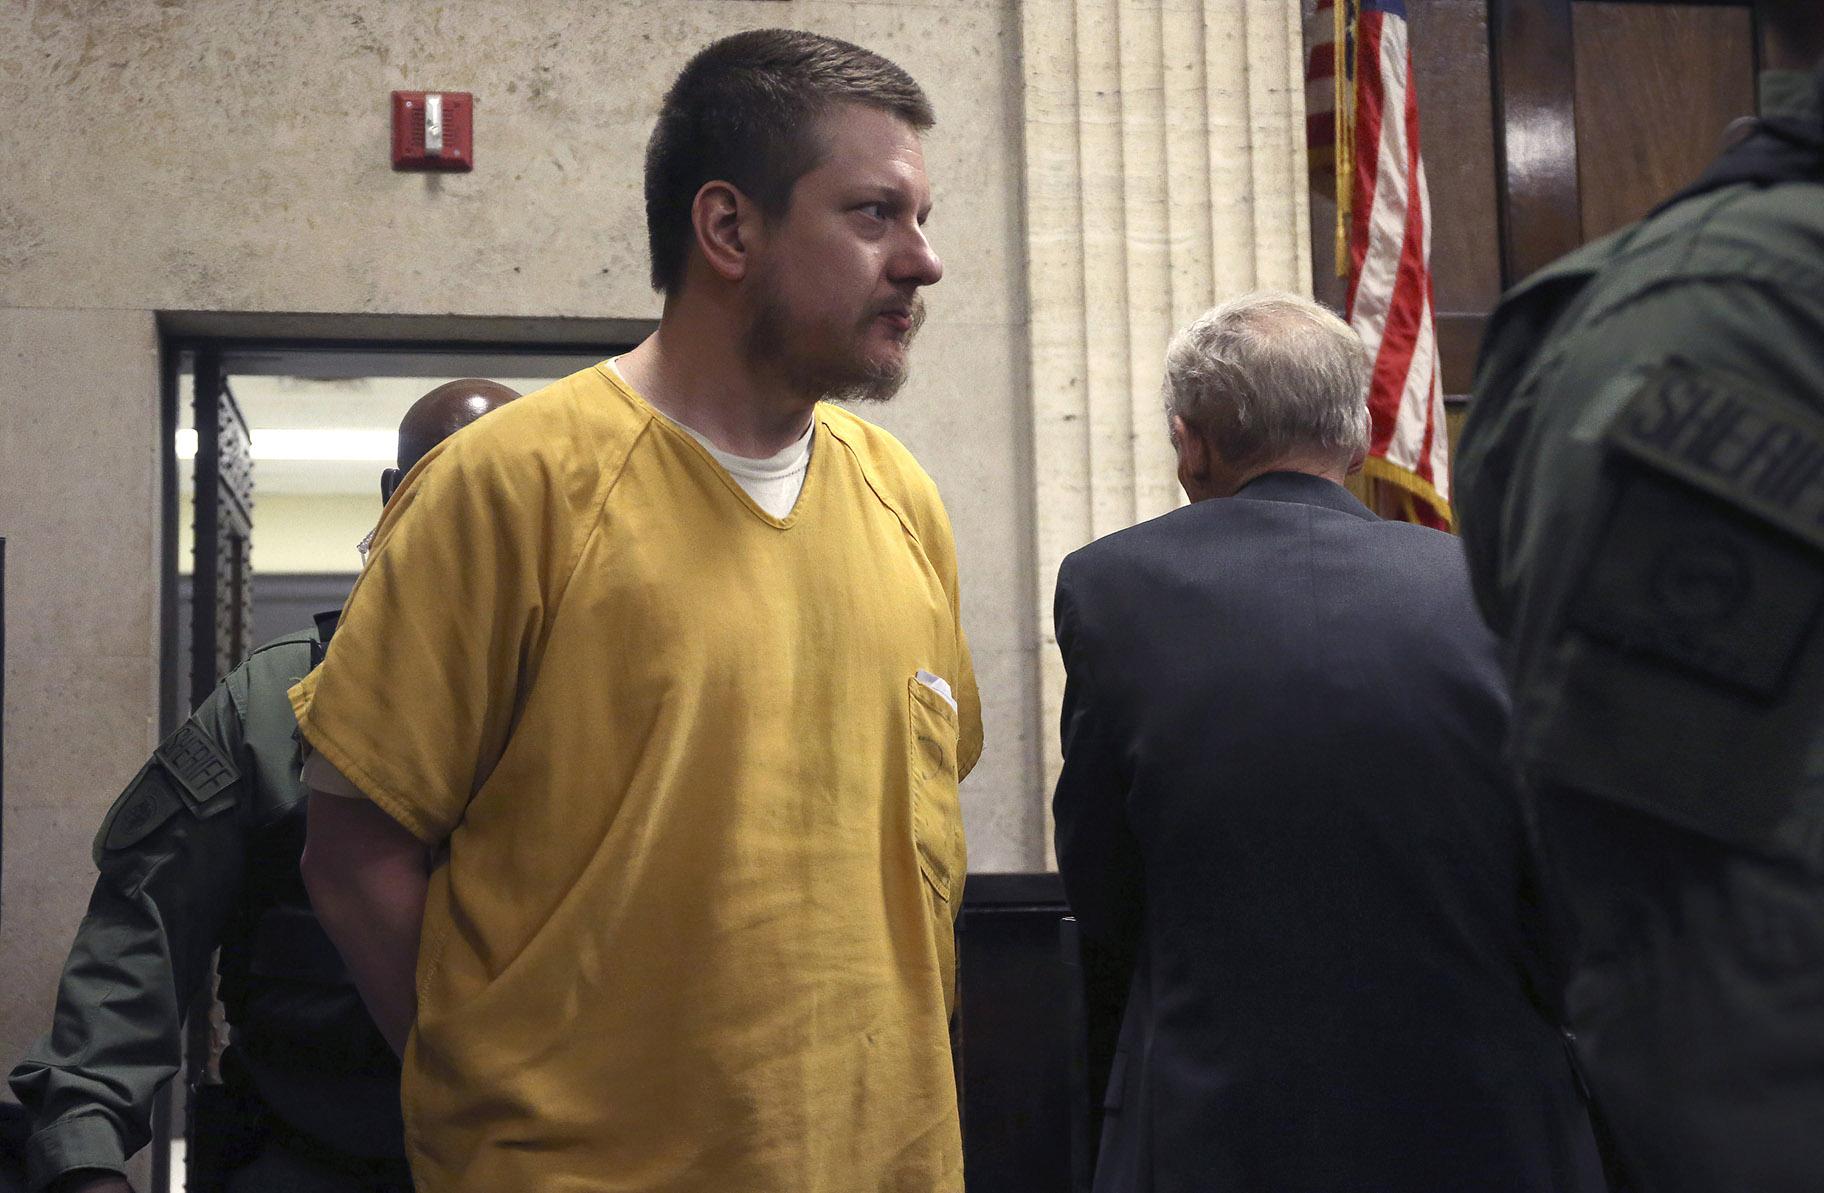 In this Jan. 18, 2019, file photo, former Chicago police Officer Jason Van Dyke is escorted into the courtroom for his sentencing hearing in Chicago, for the 2014 shooting of Laquan McDonald. (Antonio Perez / Chicago Tribune via AP, Pool, File)